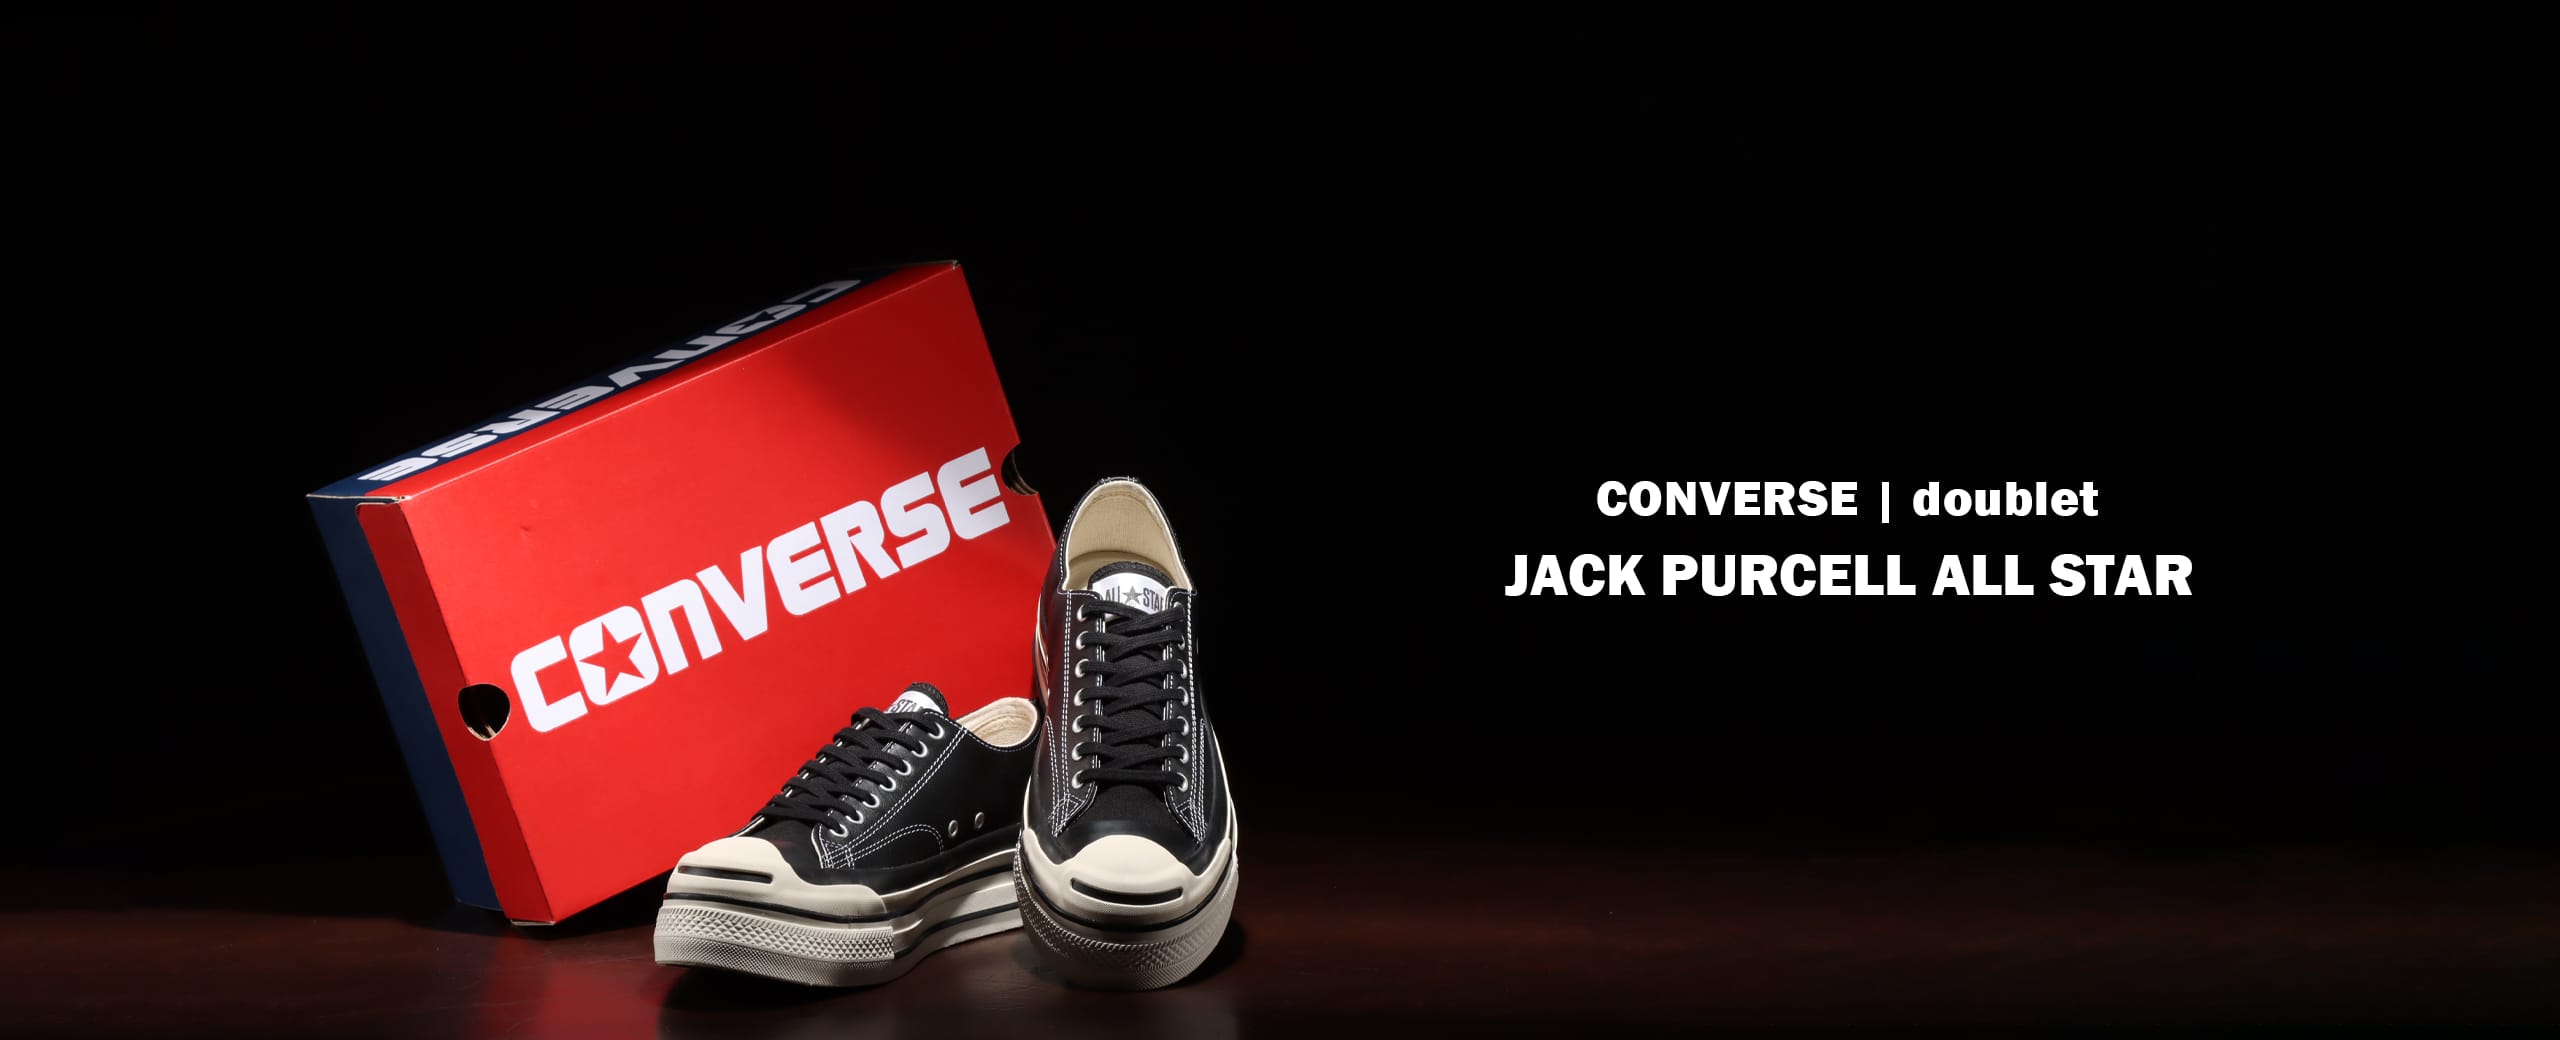 "CONVERSE | doublet JACK PURCELL ALL STAR"